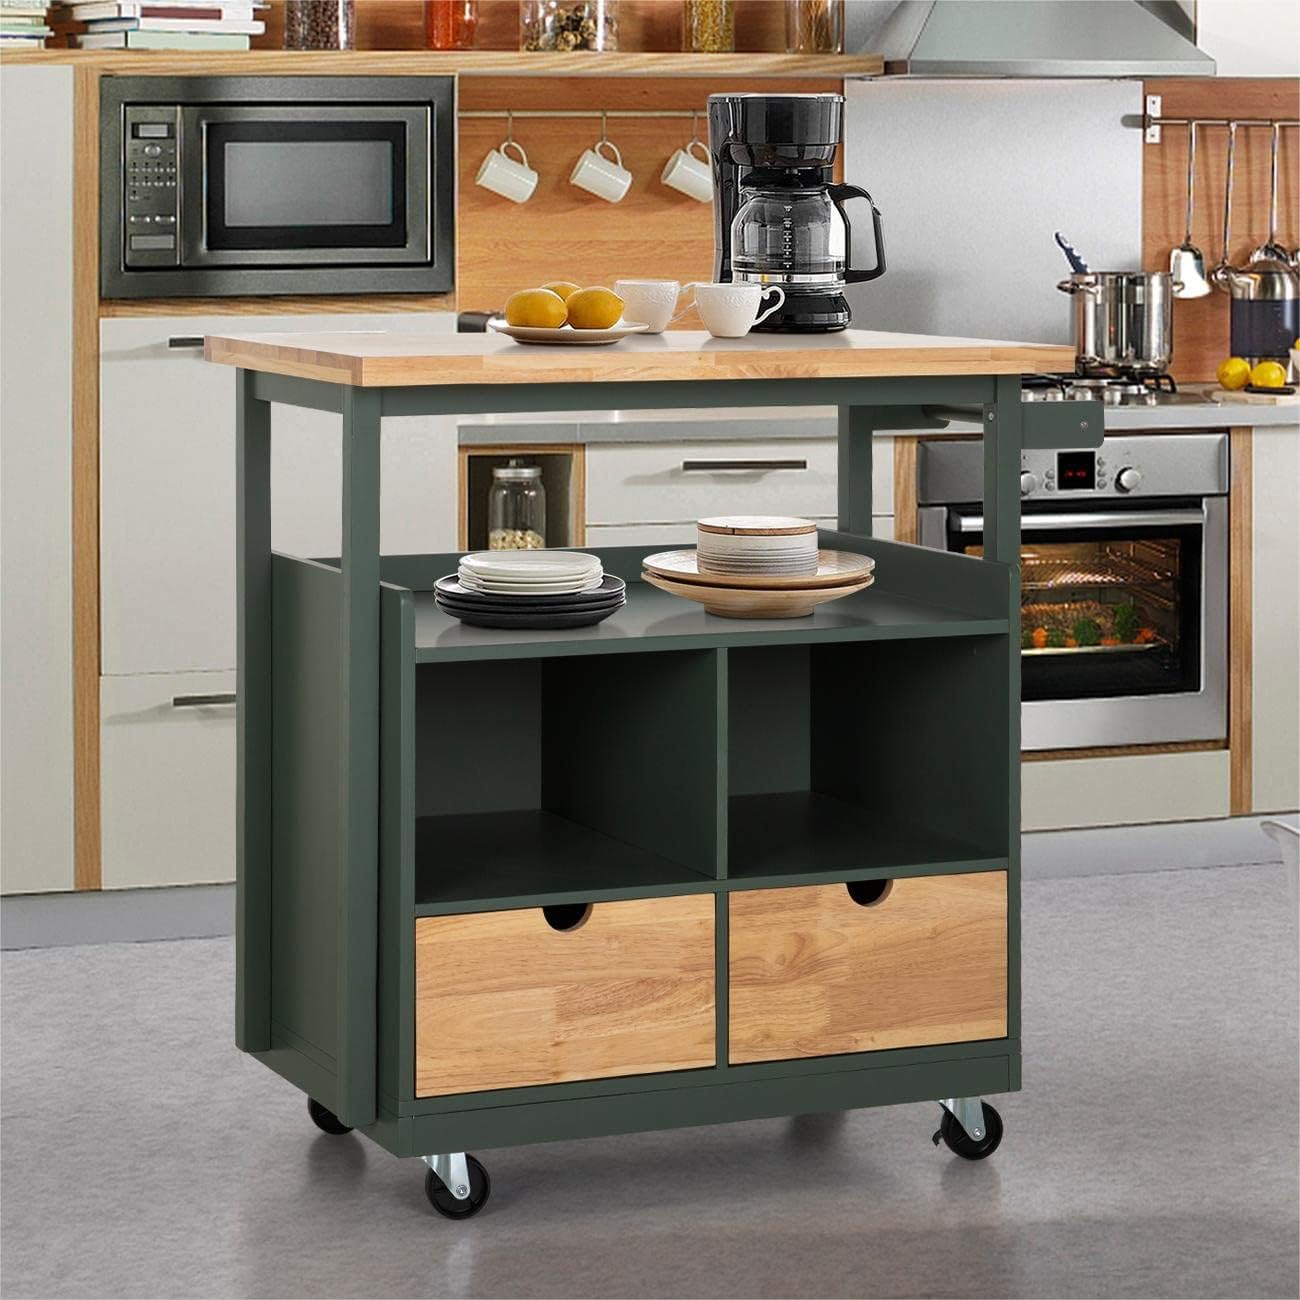 MFSTUDIO Rolling Kitchen Island on Wheels, Mobile Kitchen Cart Trolley Cart with Rubberwood Tabletop and Open Shelves, Butcher Block Island Storage Cart for Dining Room, Green